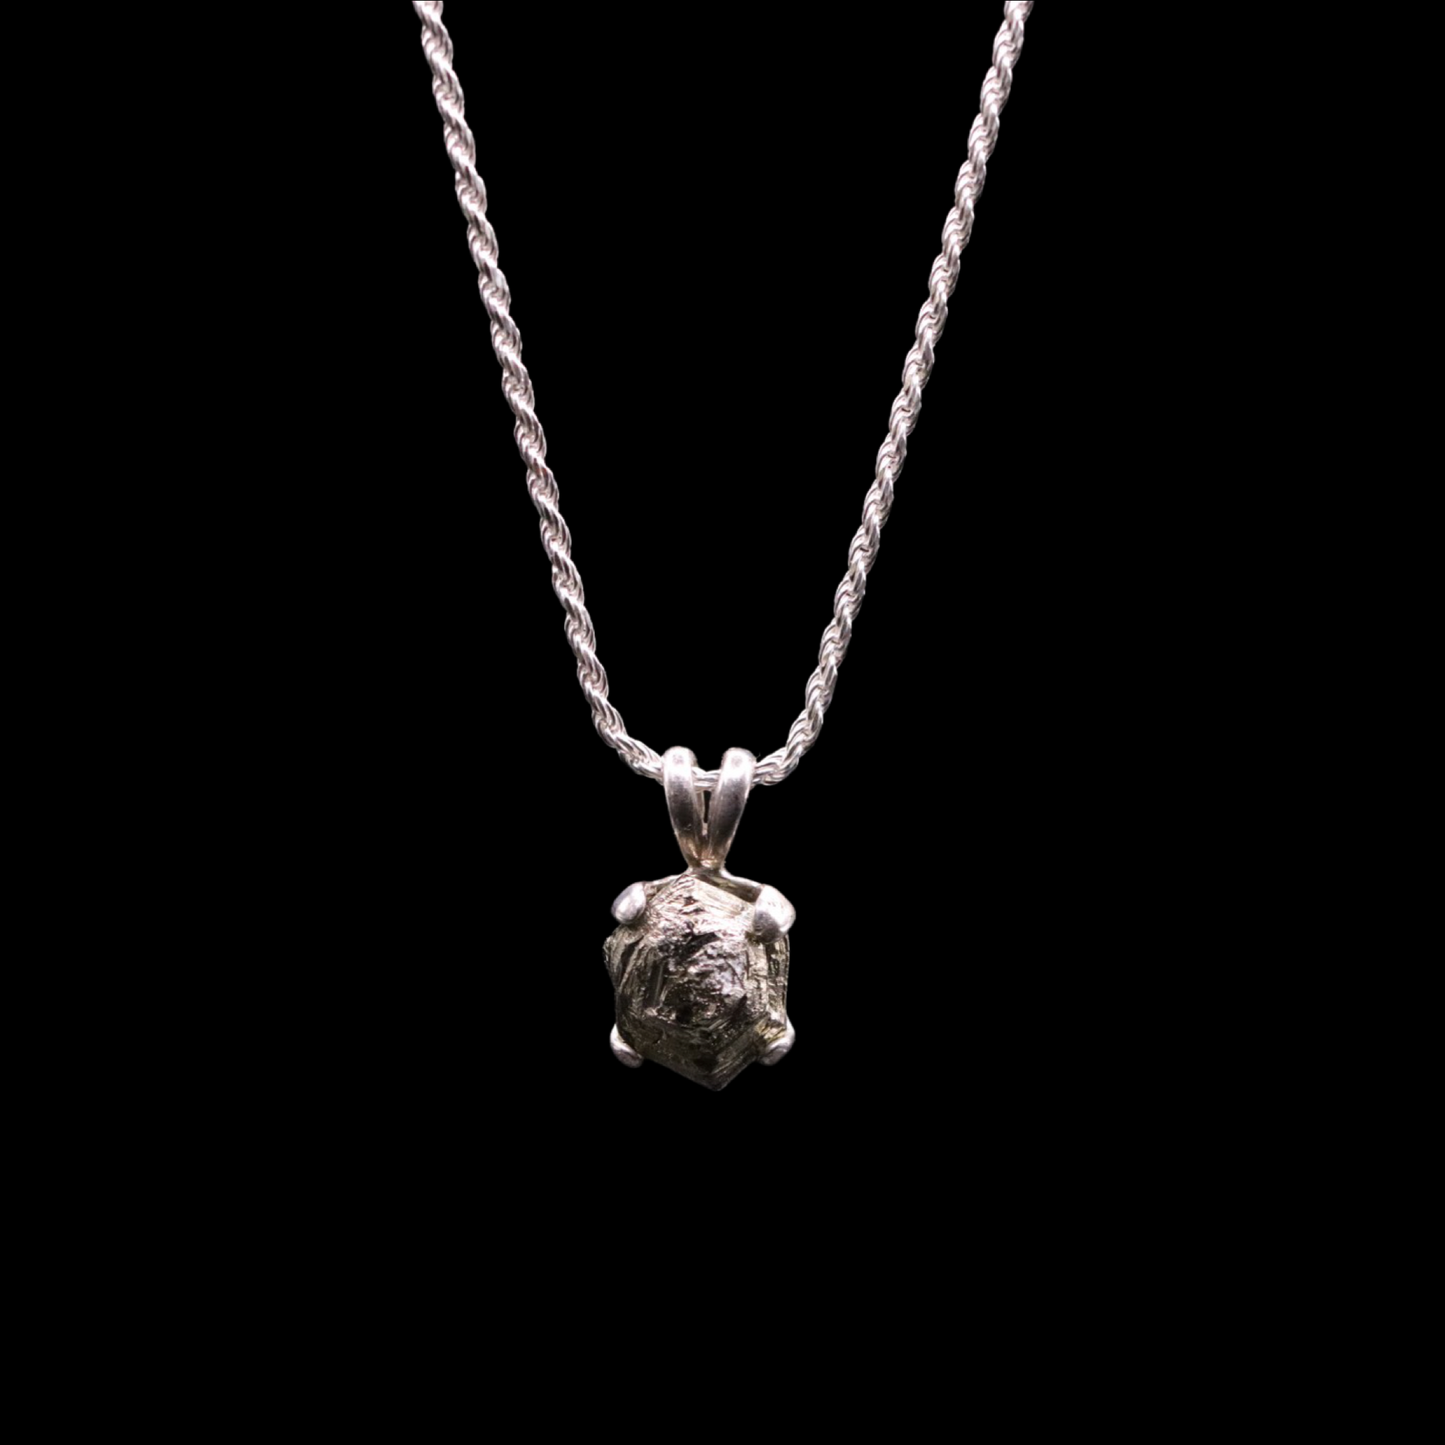 Natural Petite Peruvian Pyrite Solitaire on Rope